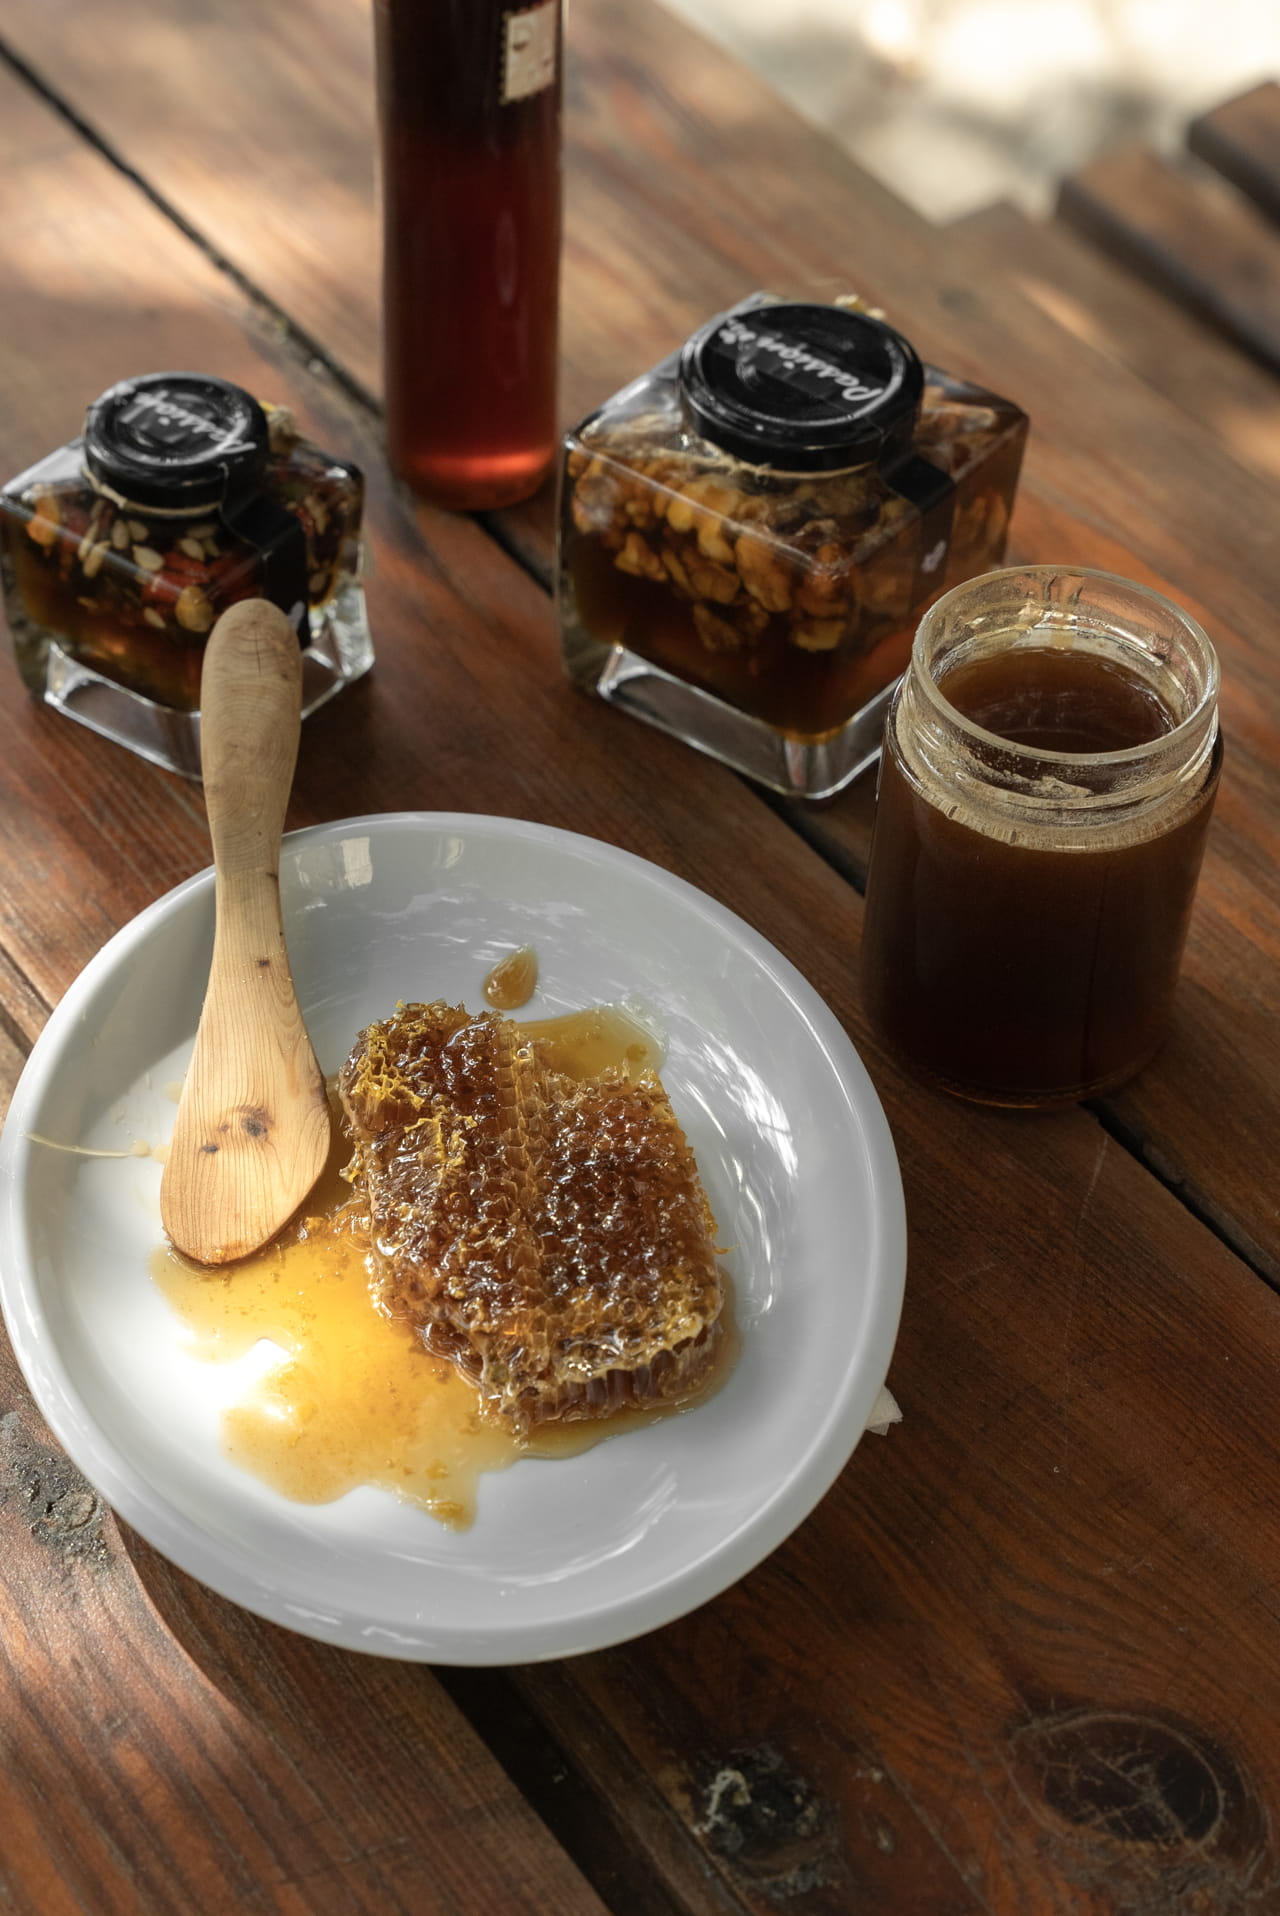 Local honey is found on every breakfast table in Halkidiki